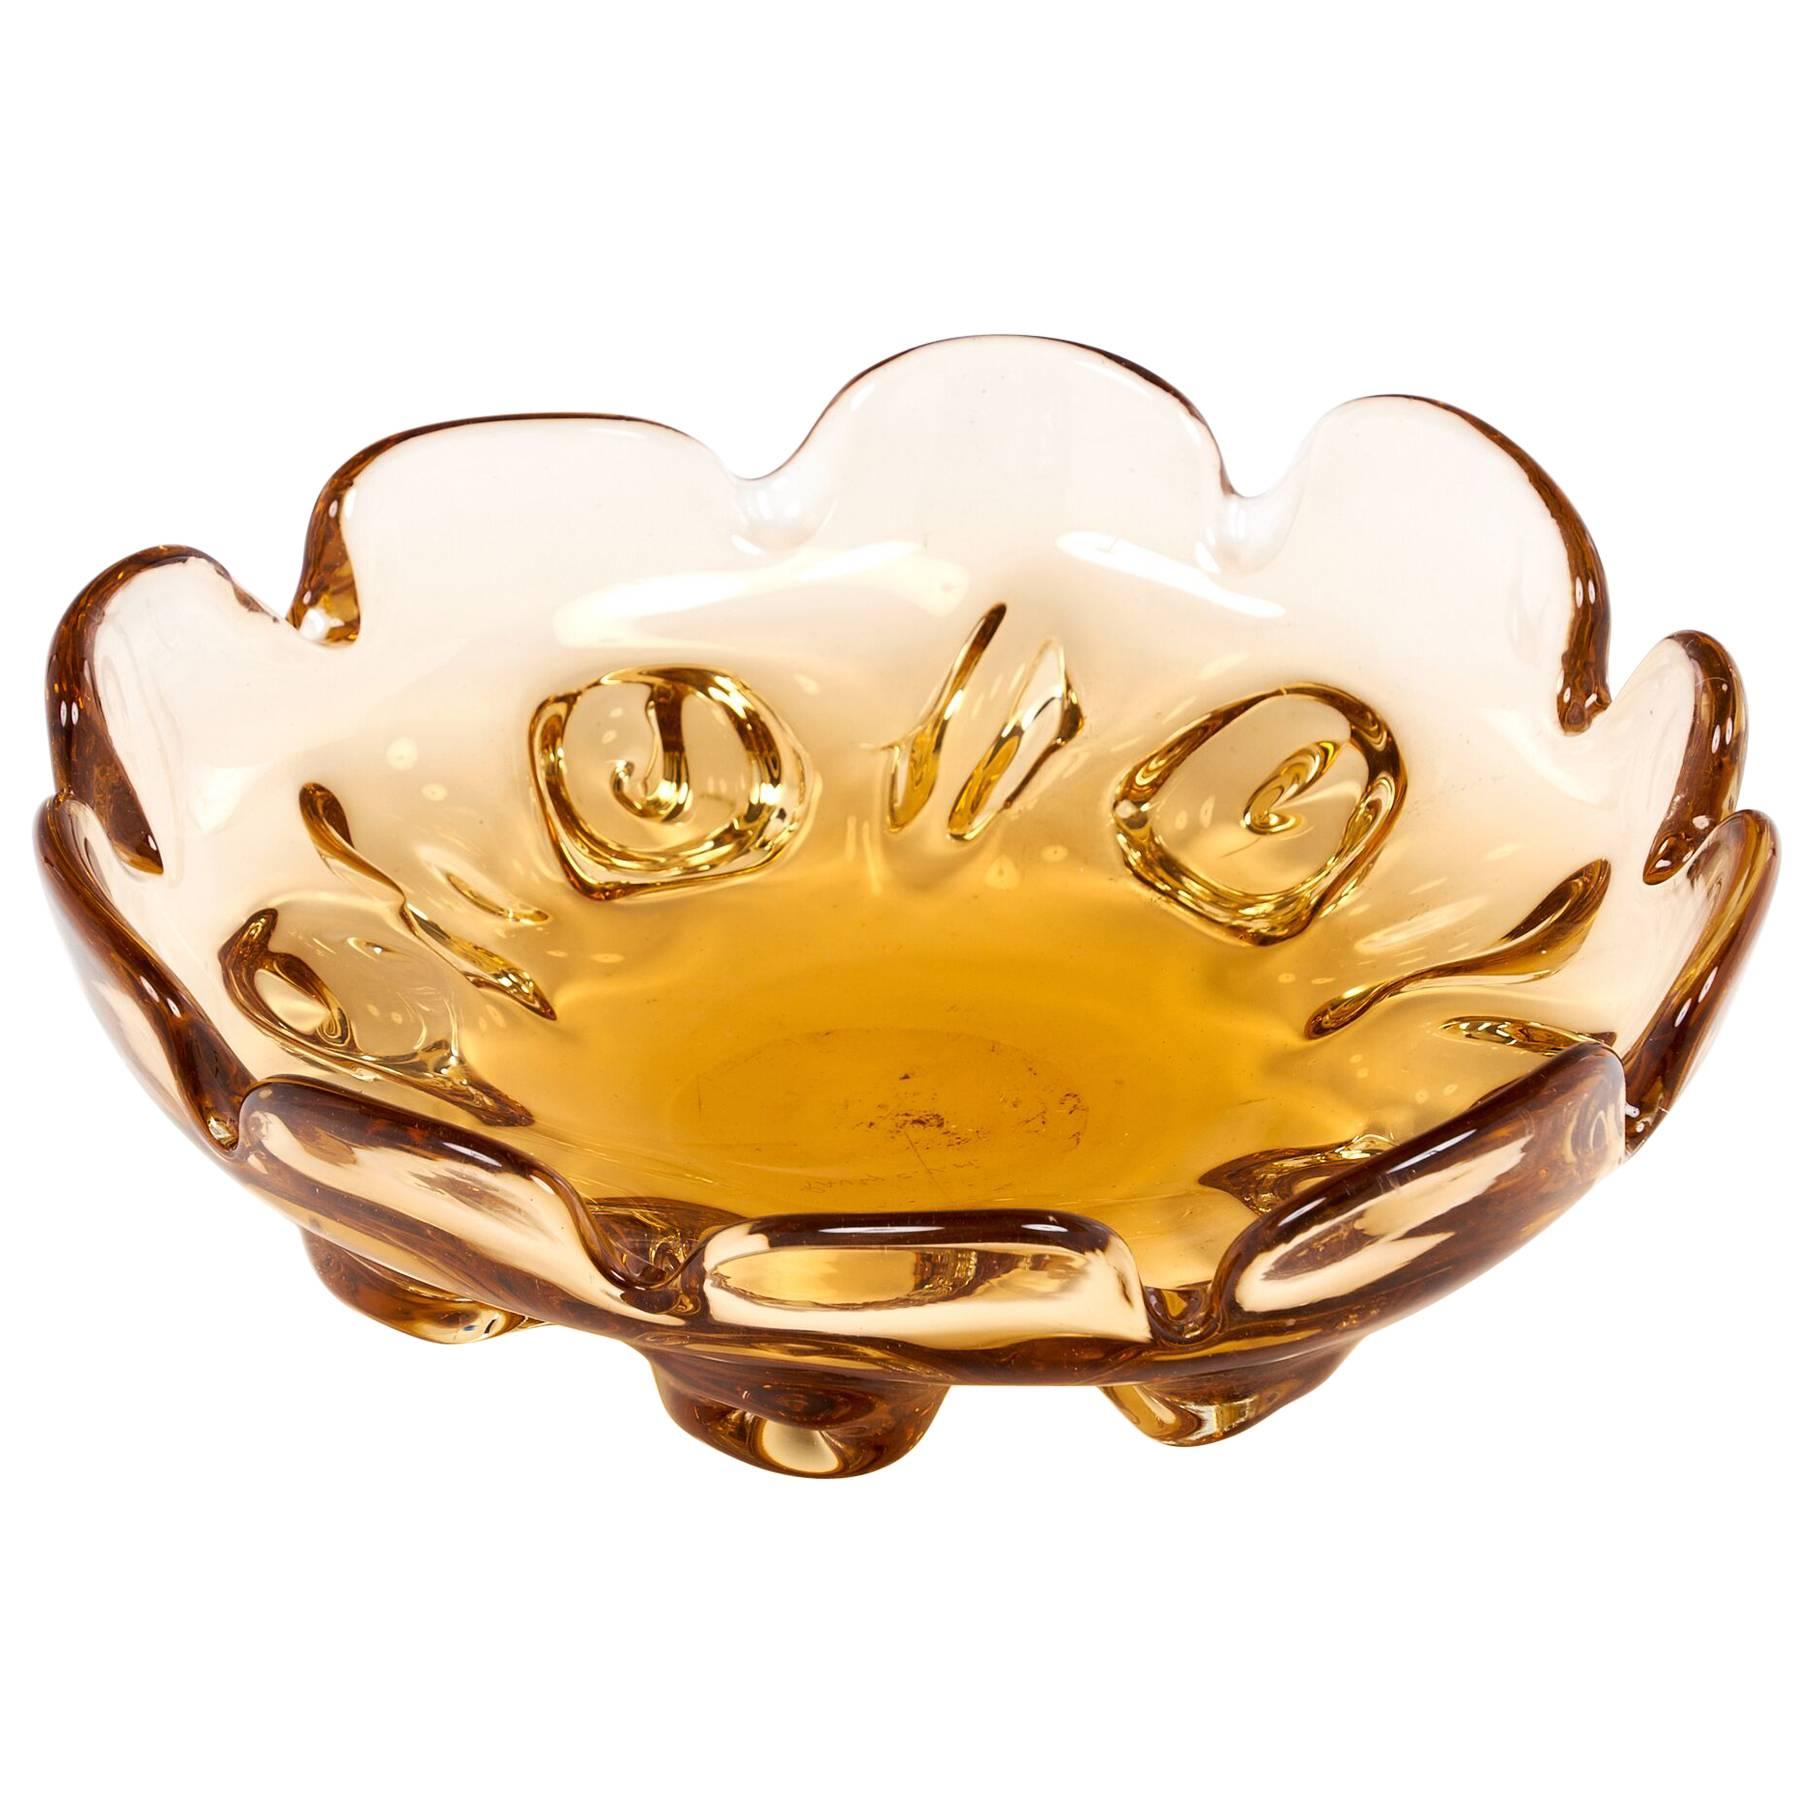 Amber Murano Glass Bowl, Signed by Pauly, circa 1950